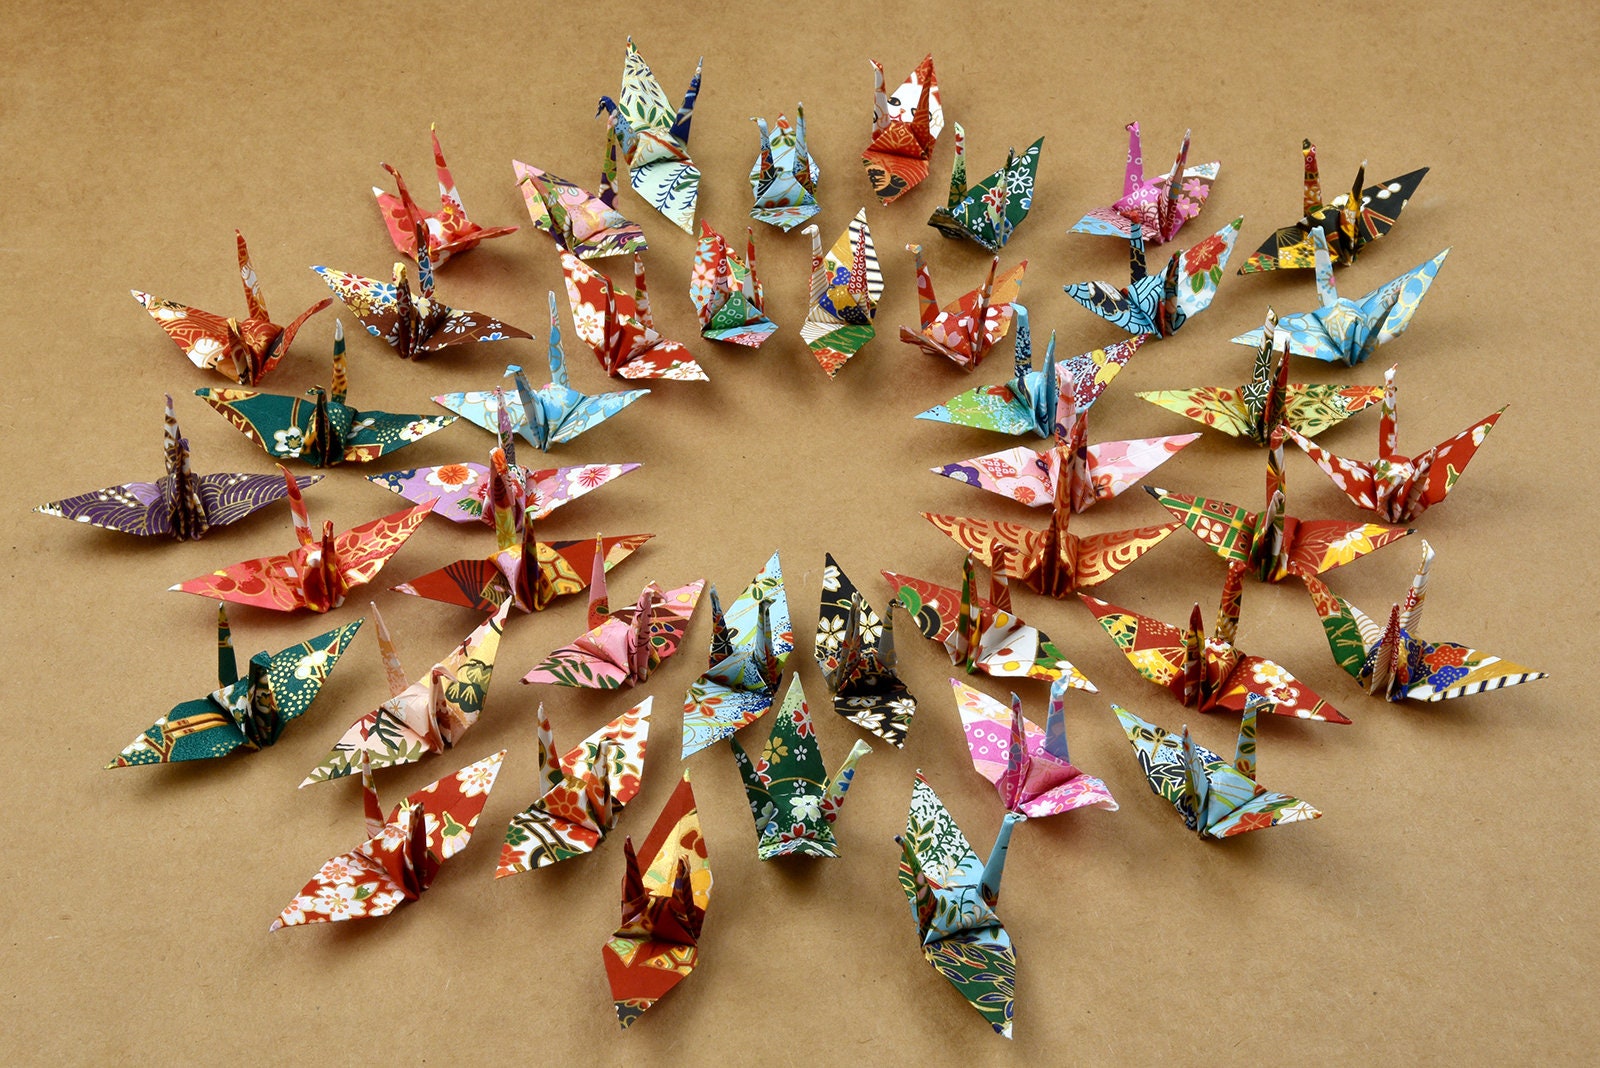 1000 Origami Paper Crane Washi Paper Origami Crane Different patterns Japanese Print Made of 1.5 inches for Wedding decor Origamipolly